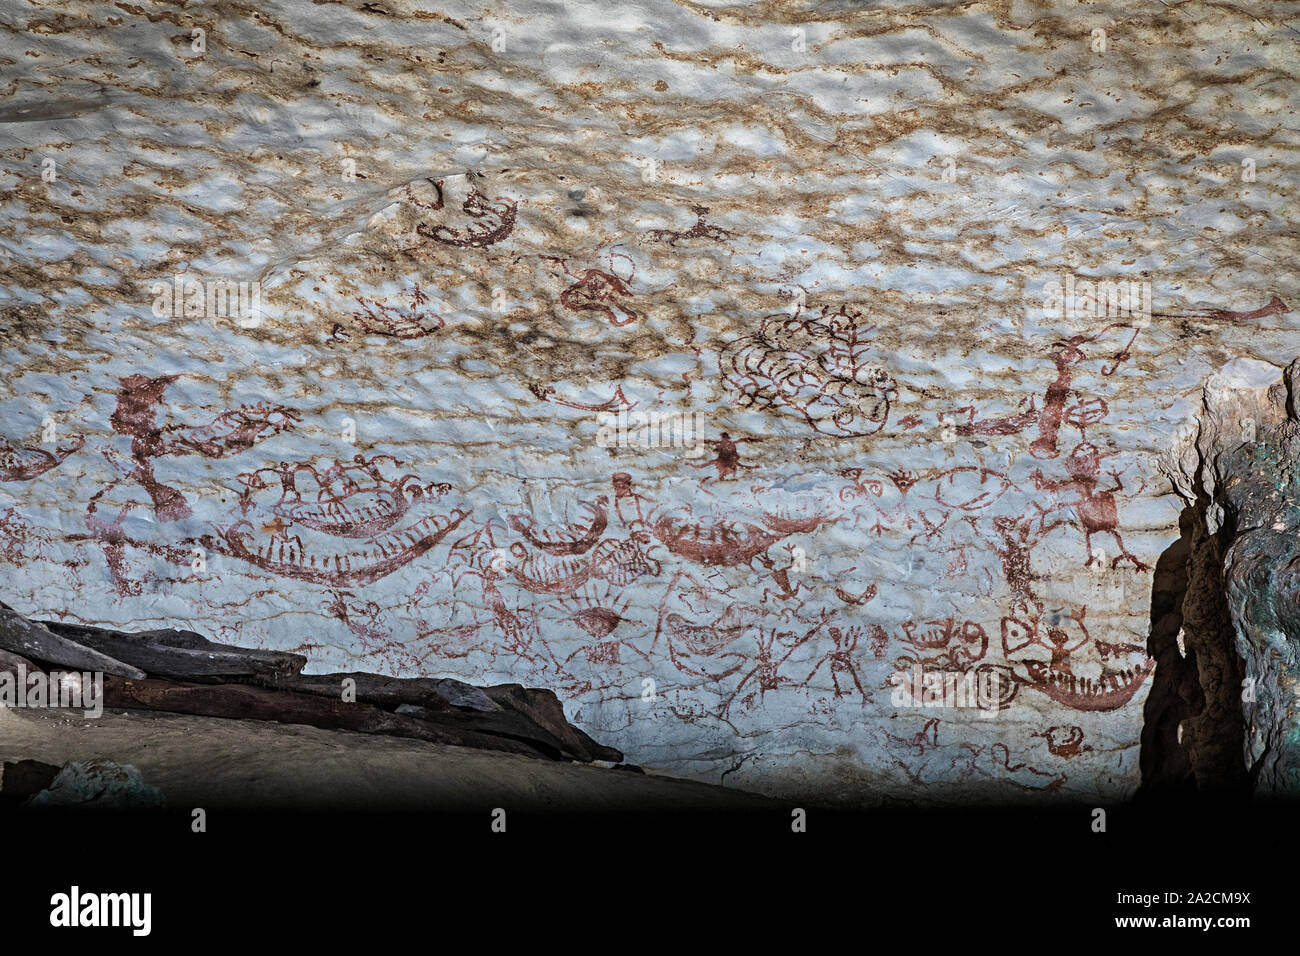 Prehistoric art in the Painted Cave at Niah cave, Malaysia, up to 40,000 years old Stock Photo